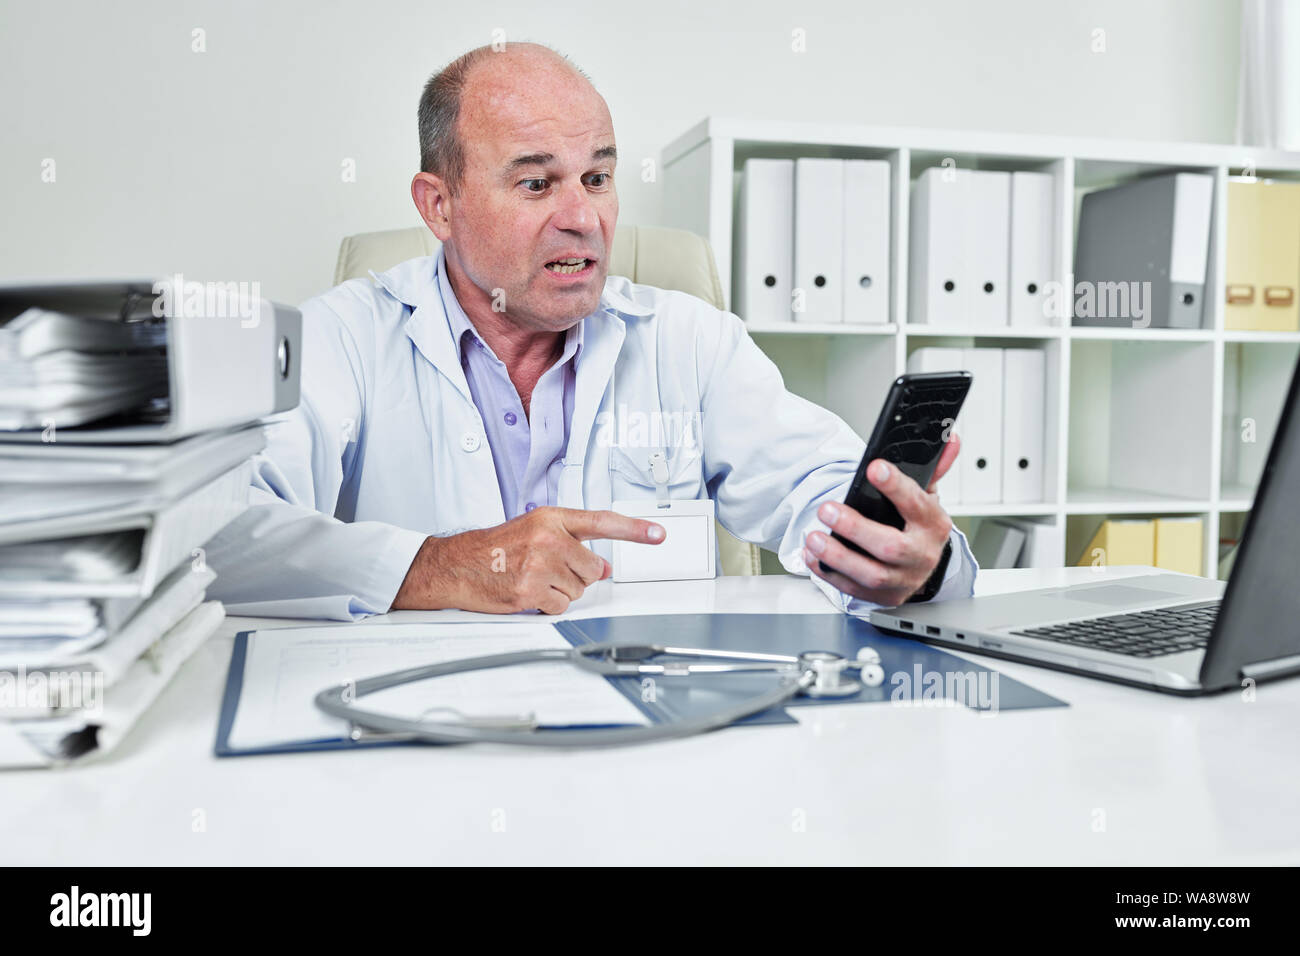 Angry emotional general practitioner in labcoat video calling coworker or annoying patient Stock Photo